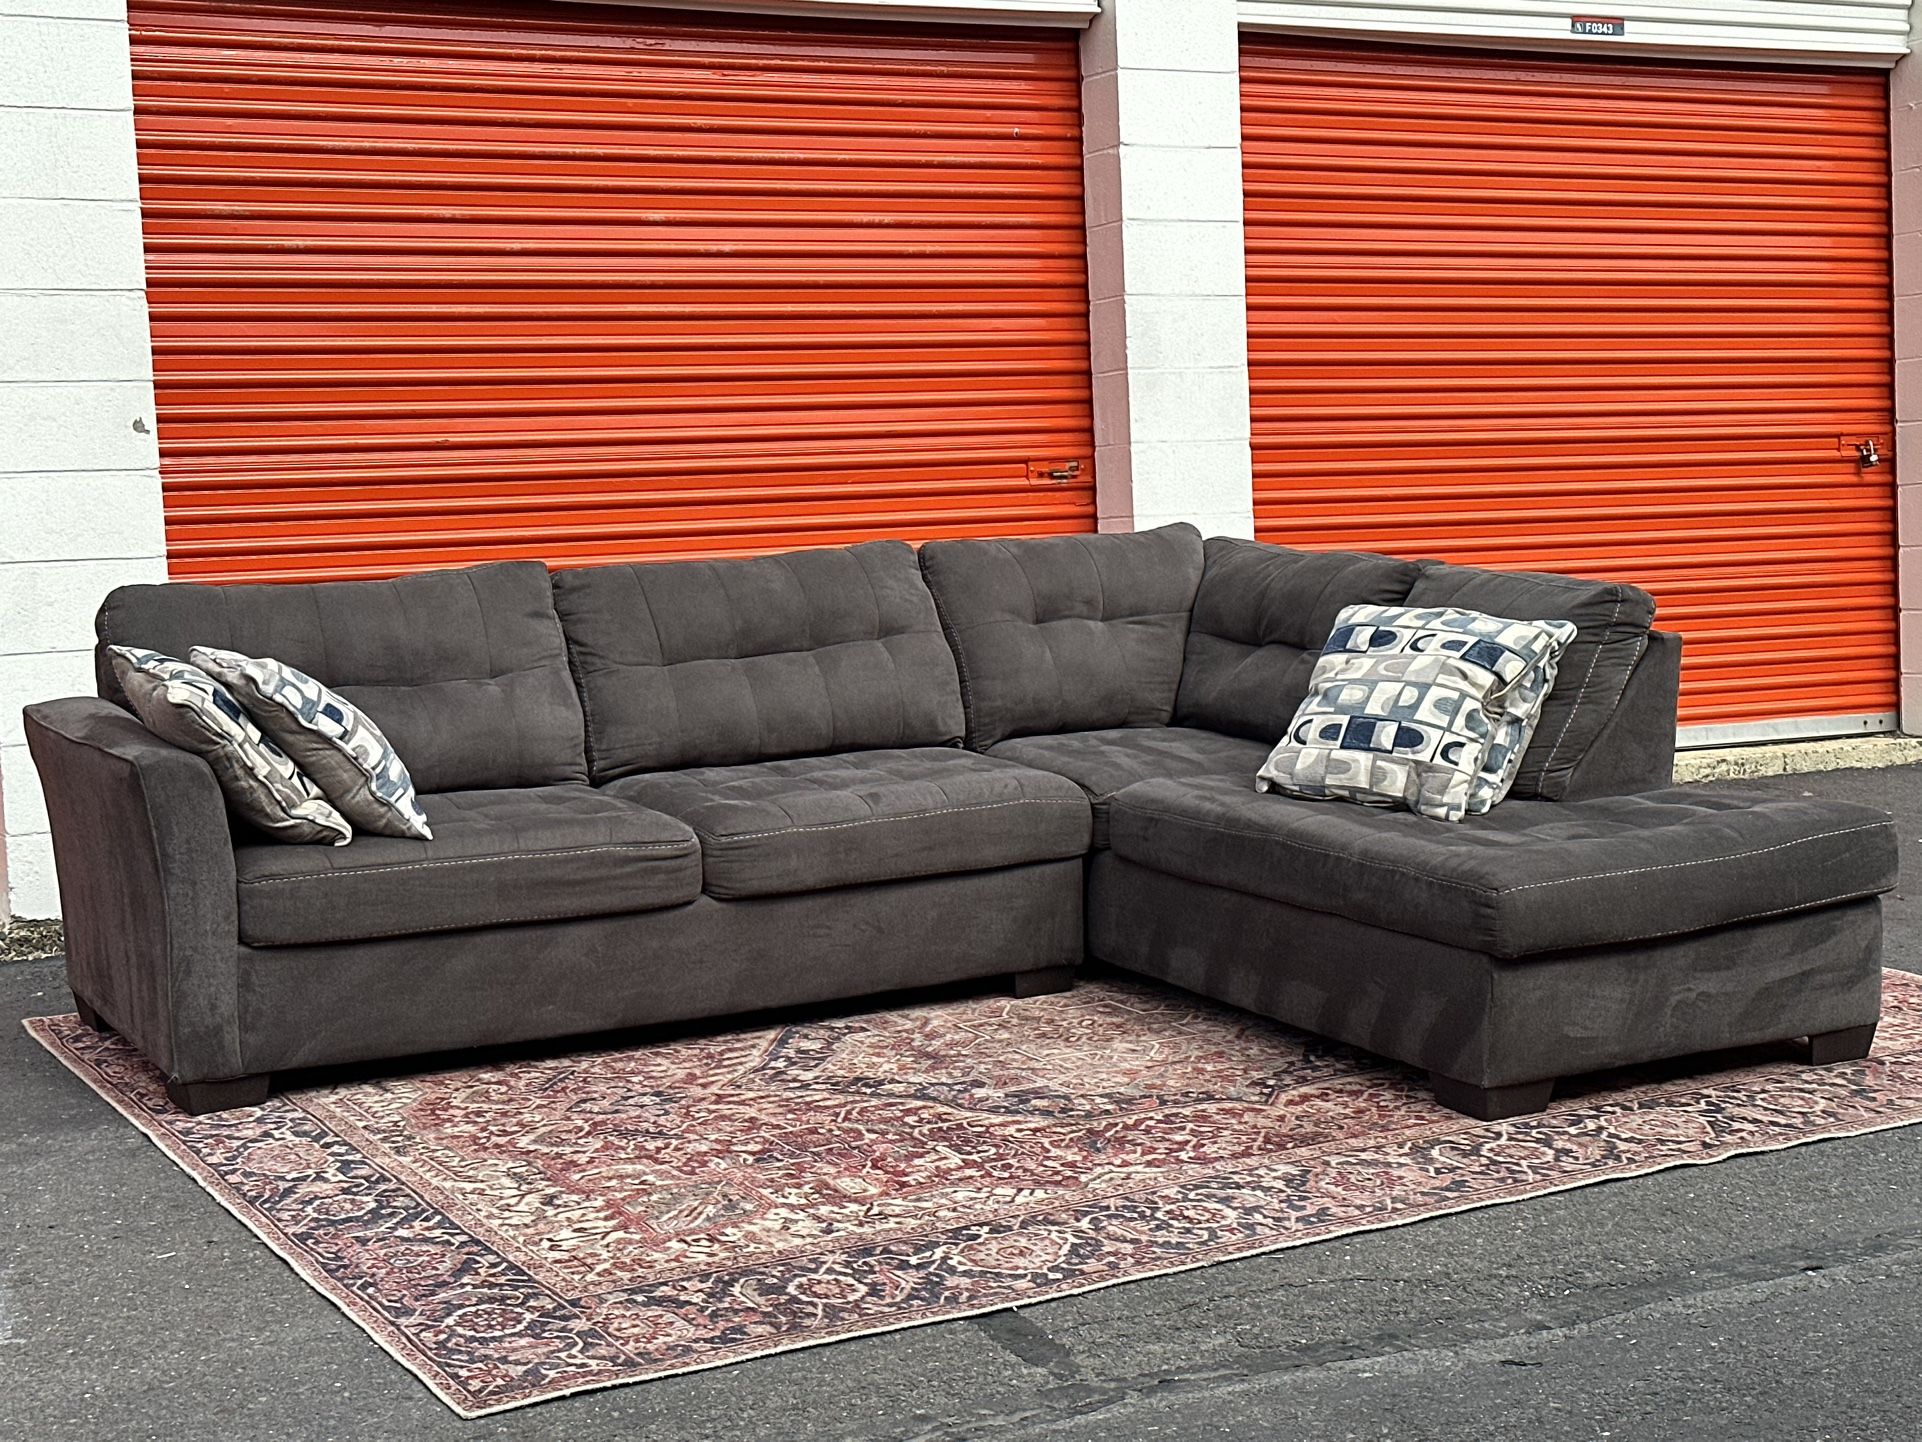 Raymour & Flanigan L Shape Sectional Couch Set Free Curbside Delivery 